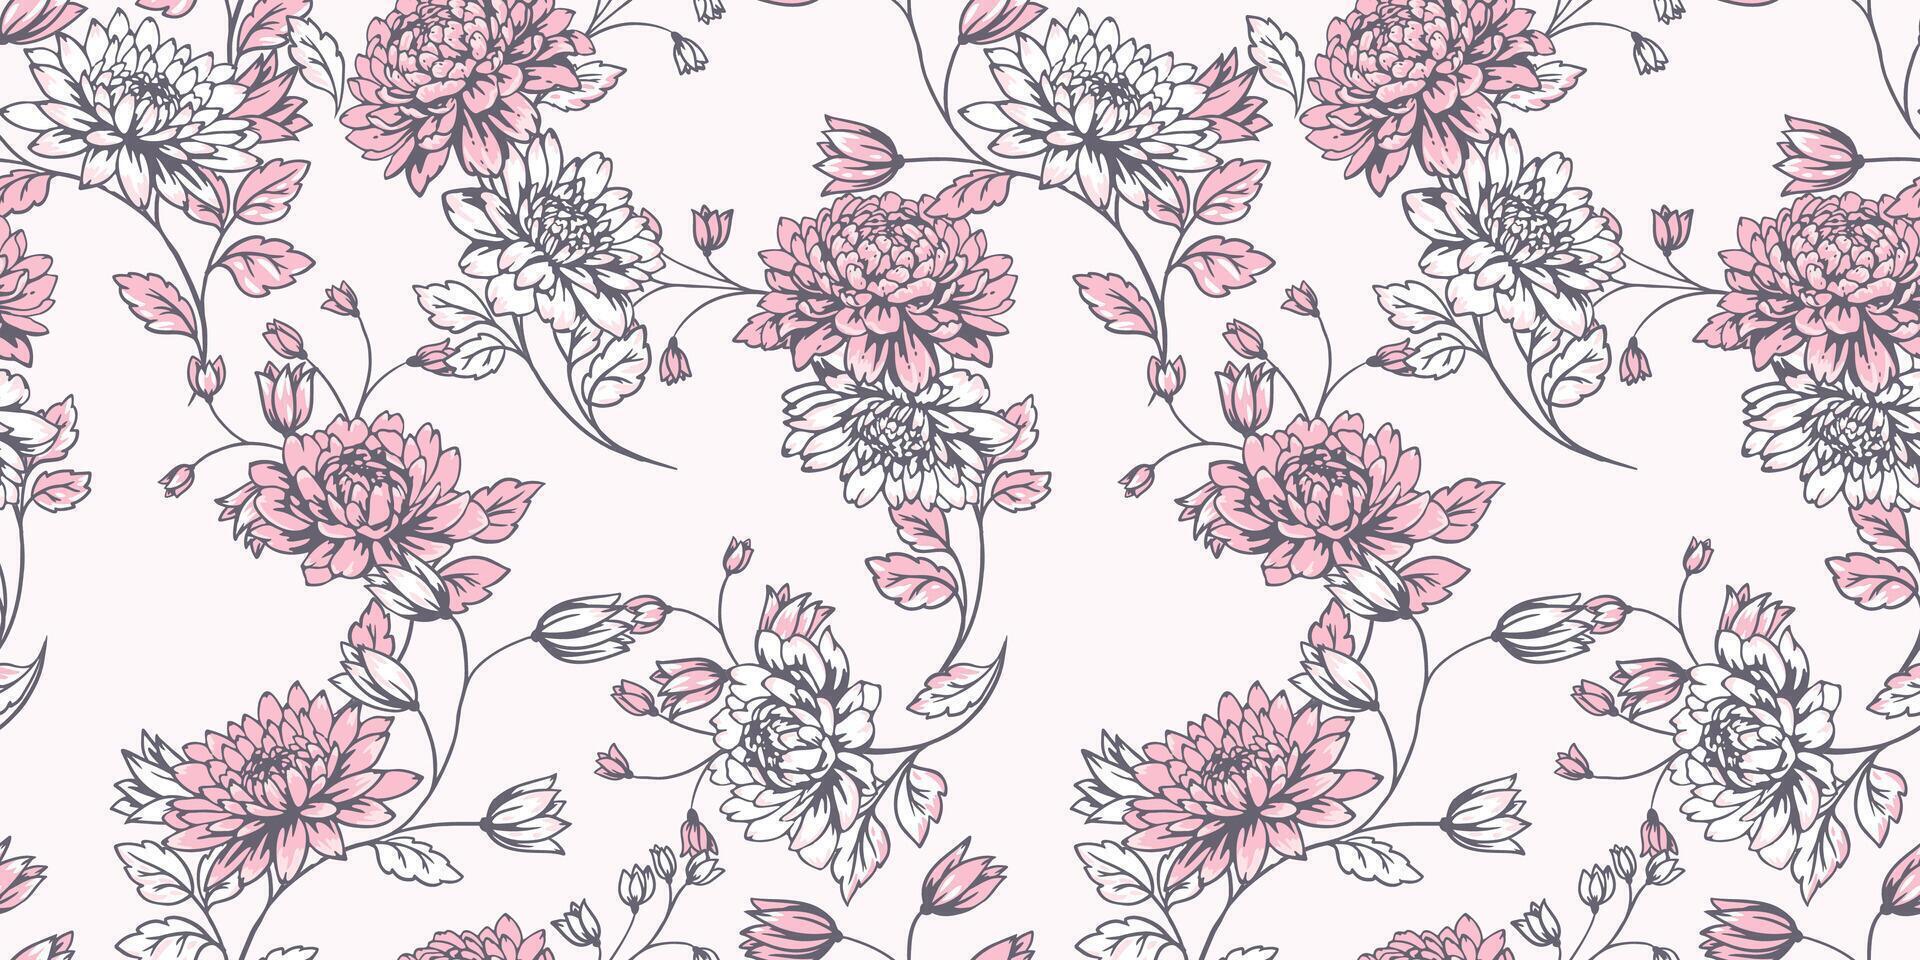 Blooming gently branches with flowers dahlias, peonies and leaves seamless pattern. hand drawn. Monotone pink pastel abstract artistic floral stems print. Template for design, fabric, textile vector